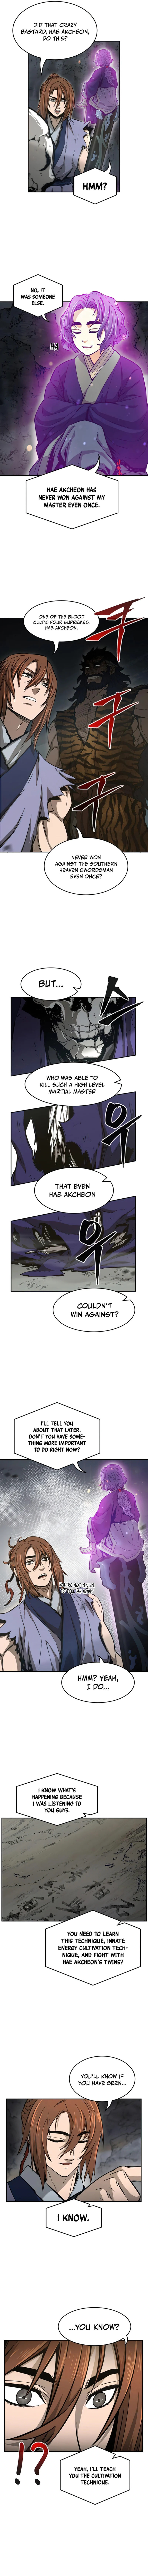 Absolute Sword Sense - Chapter 12 Page 4